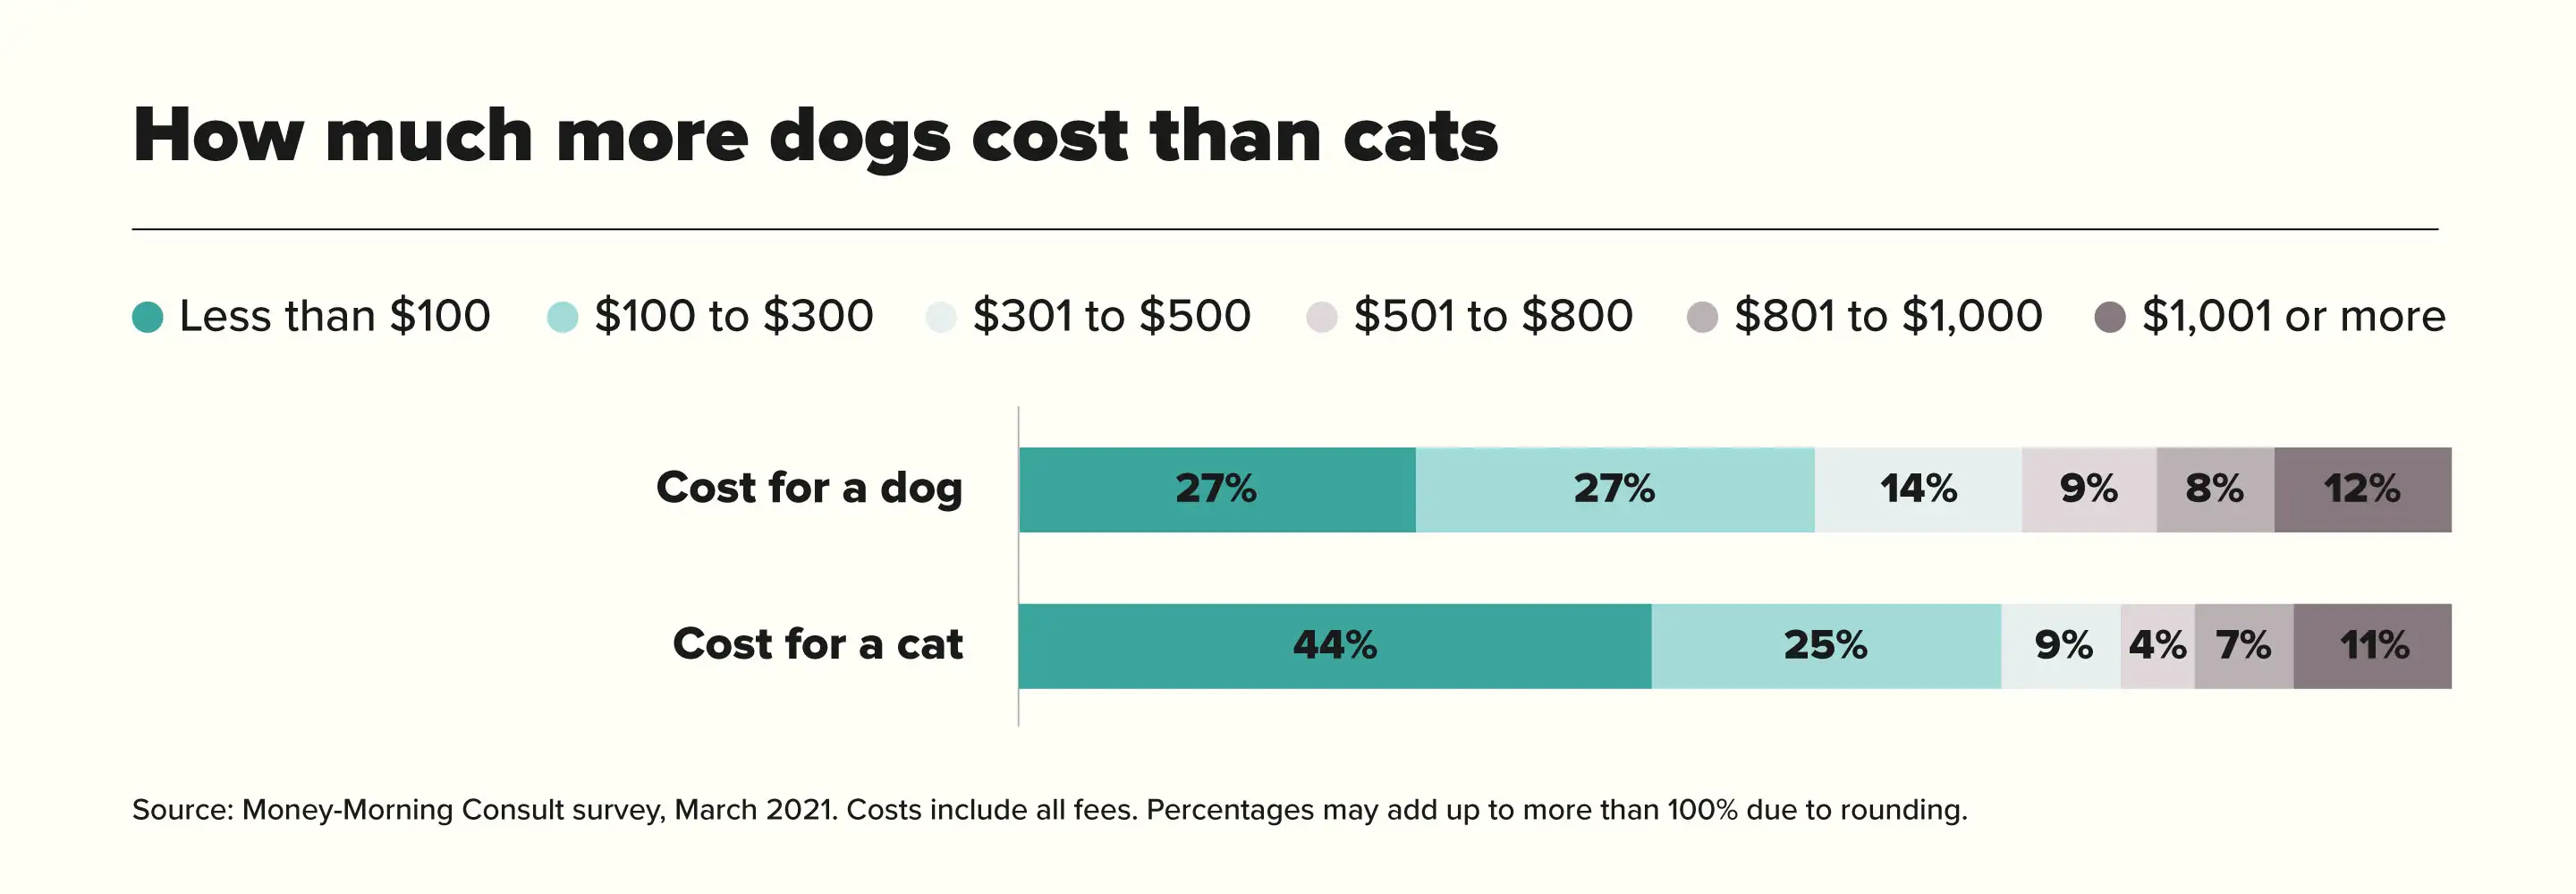 How much more dogs cost than cats